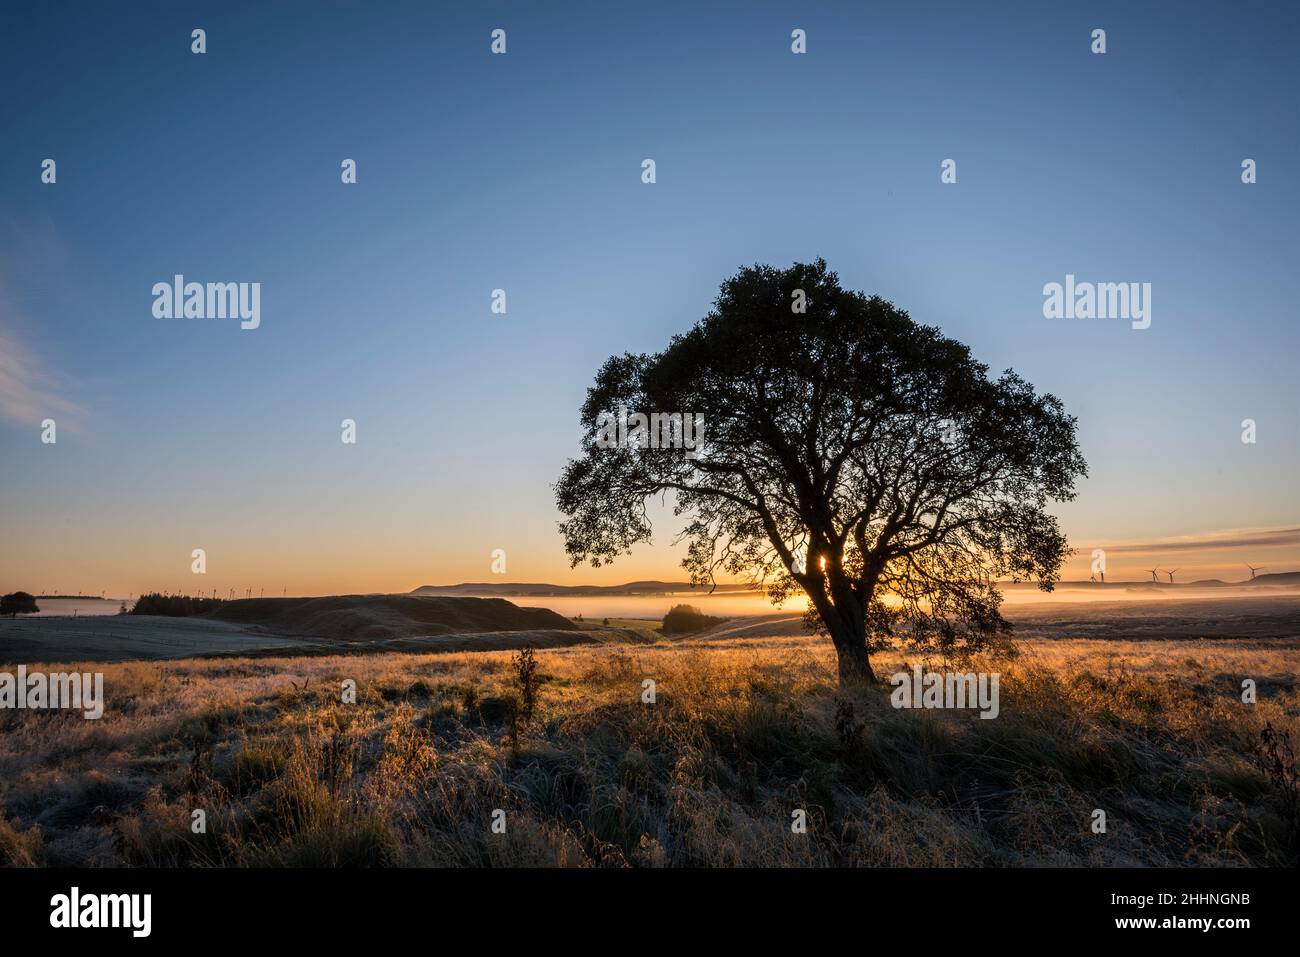 Atmospheric early morning picture of tree in field with distant cloud inversion. Stock Photo